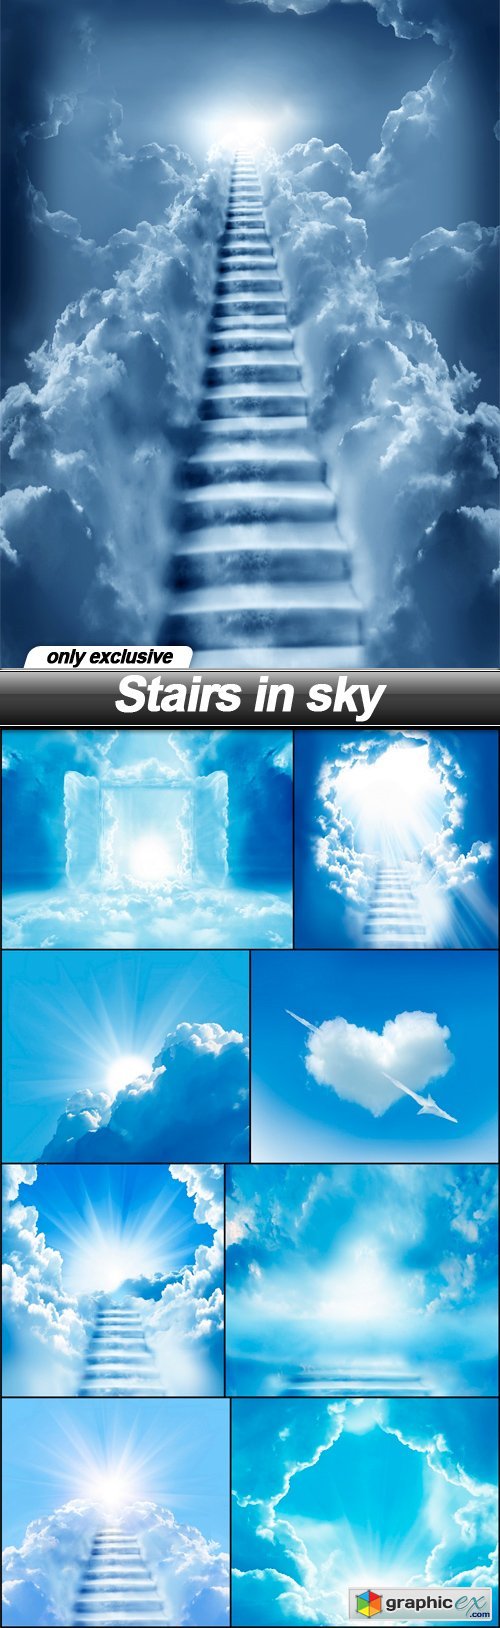 Stairs in sky - 9 UHQ JPEG